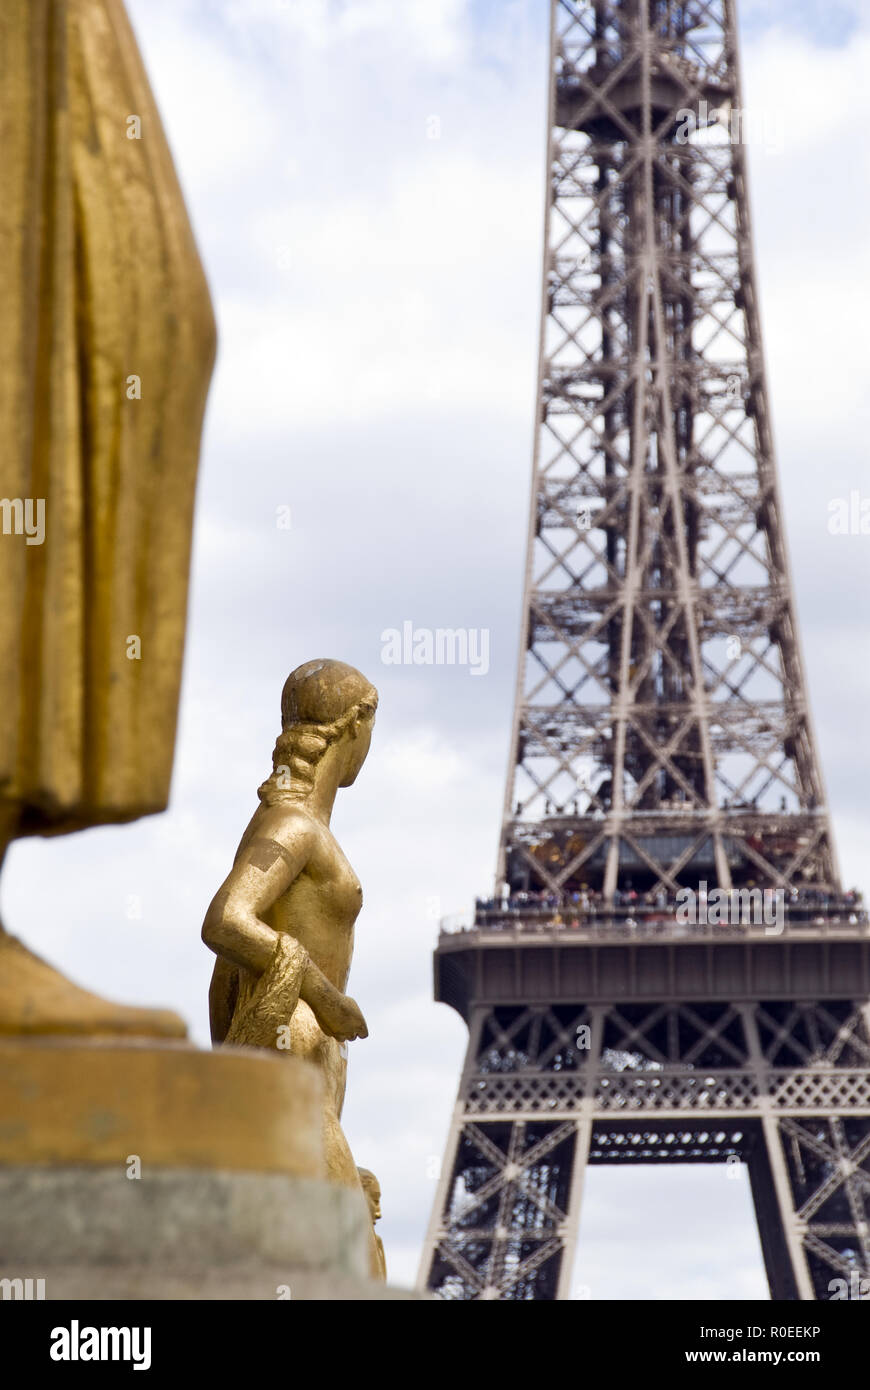 The Eiffel Tower as seen from the Place du Trocadero where gold figures stand representing the rights of man, Paris, France. Stock Photo